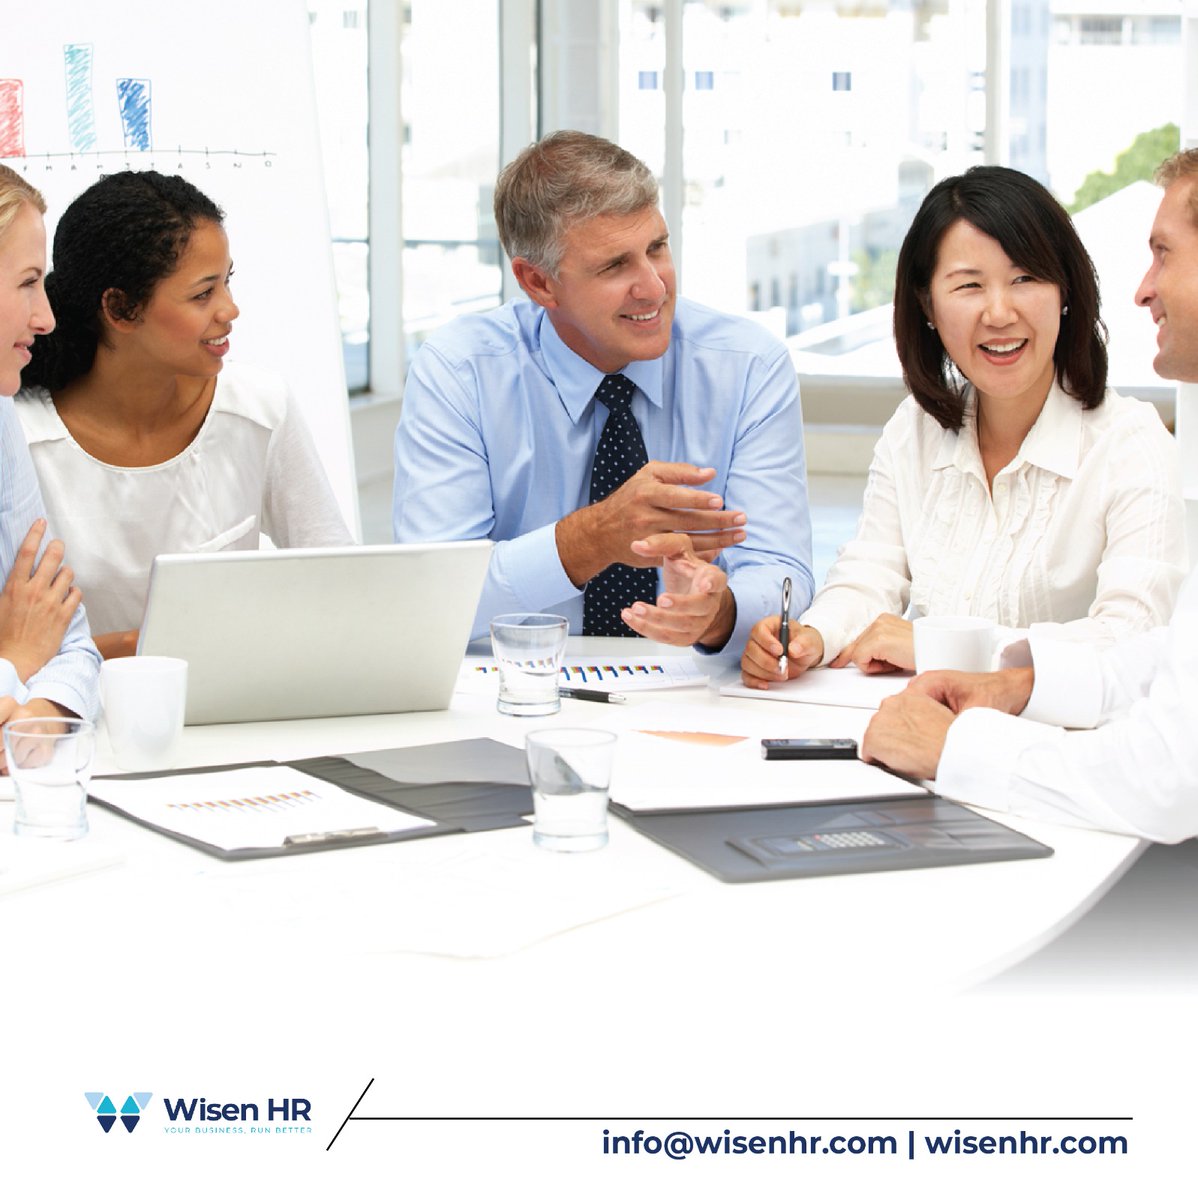 Smart businesses outsource their recruitment function. Join the league of successful companies and recruit smarter.  Smart Recruitment: Contact Us – info@wisenhr.com

#WisenHR #RecruitmentServices #HR #TalentAcquisition #BusinessGrowth #RecruitSmarter